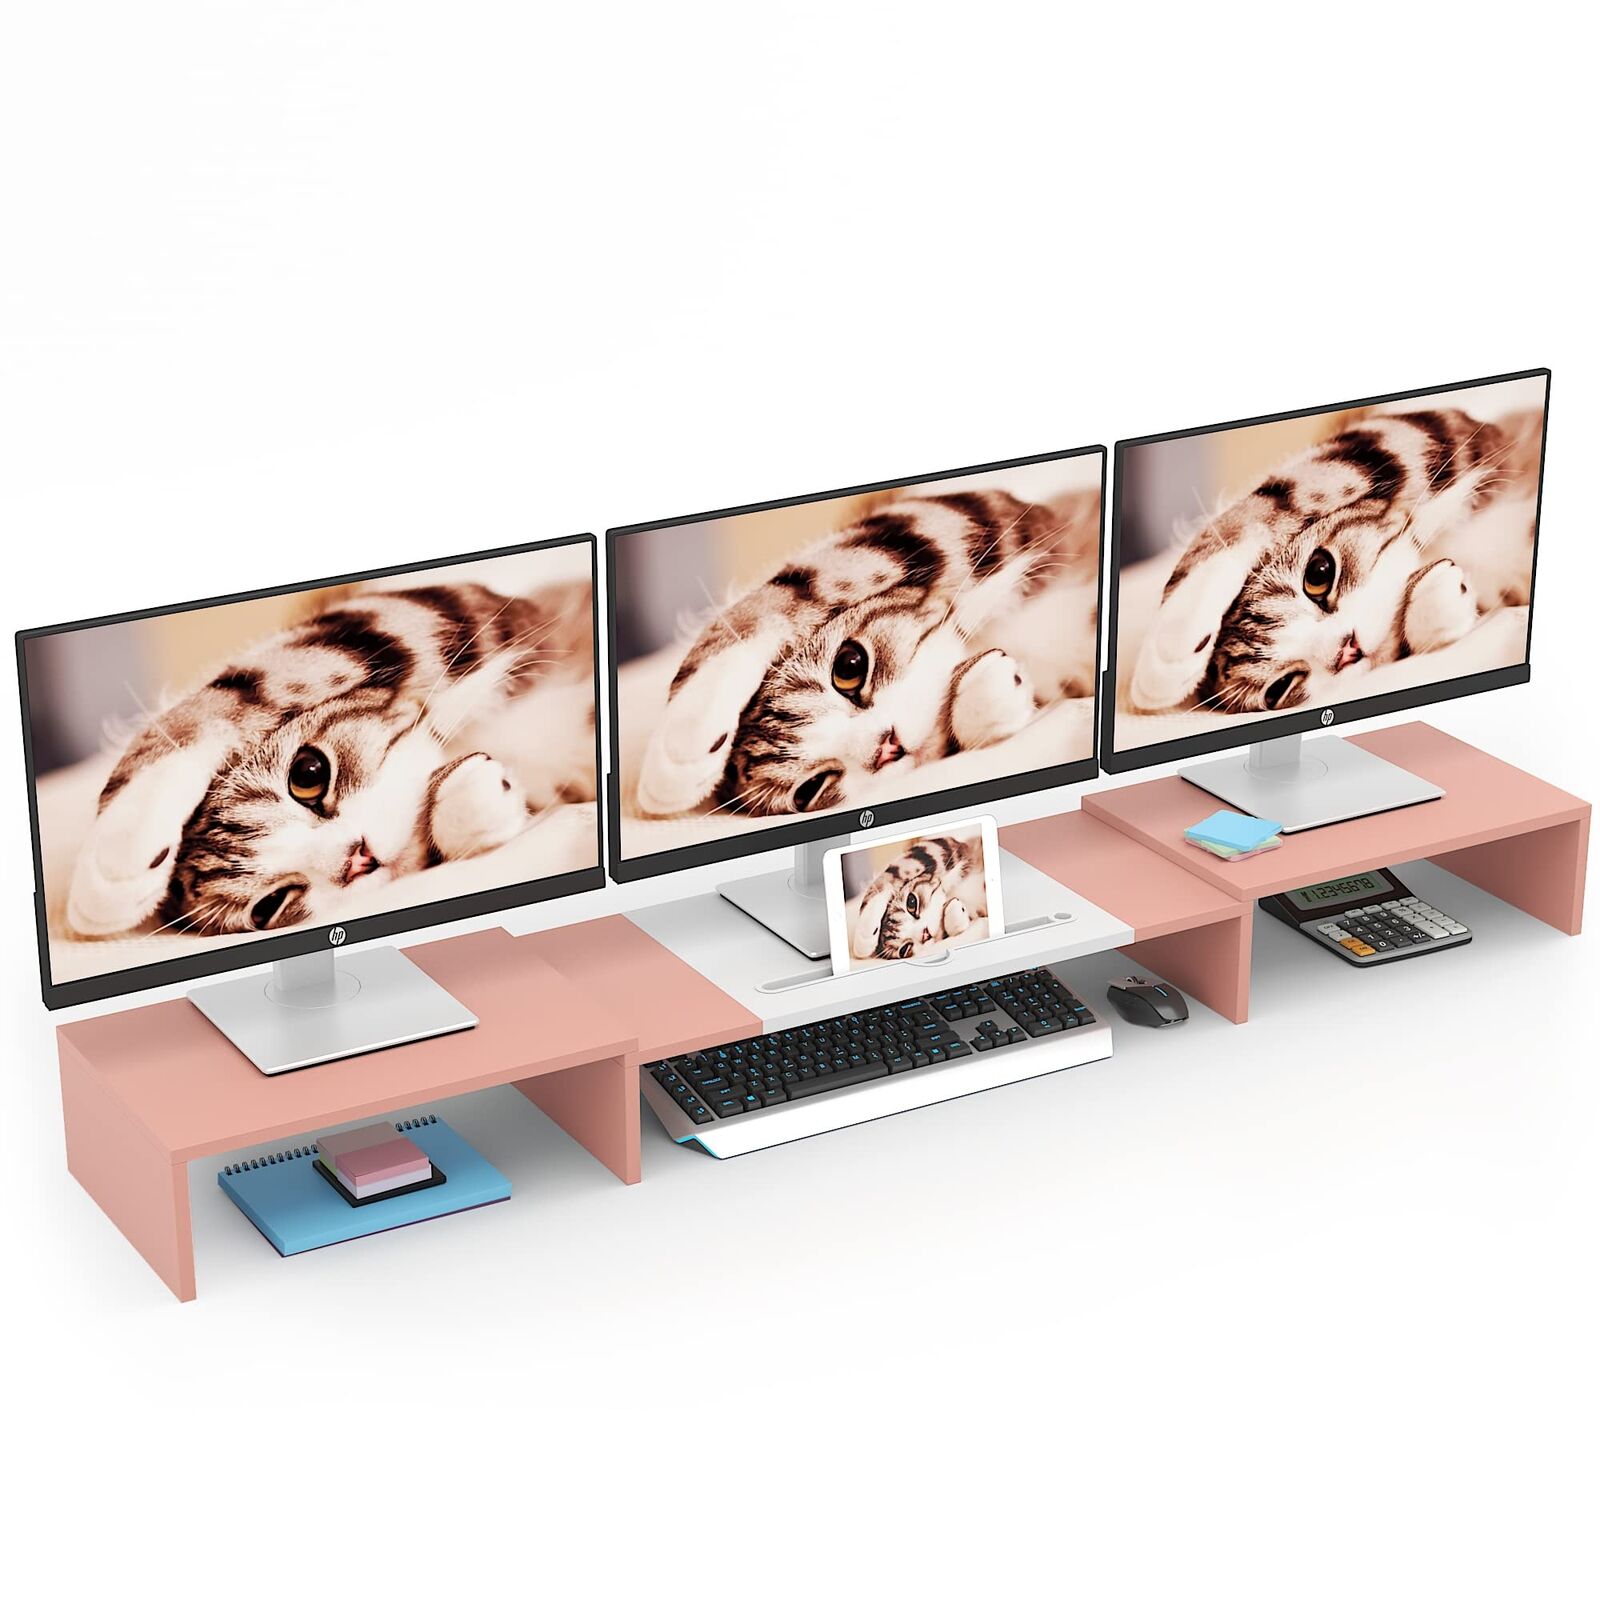 WESTREE Triple Dual Monitor Stand Riser 56 Extra Long Monitor Stand for pink